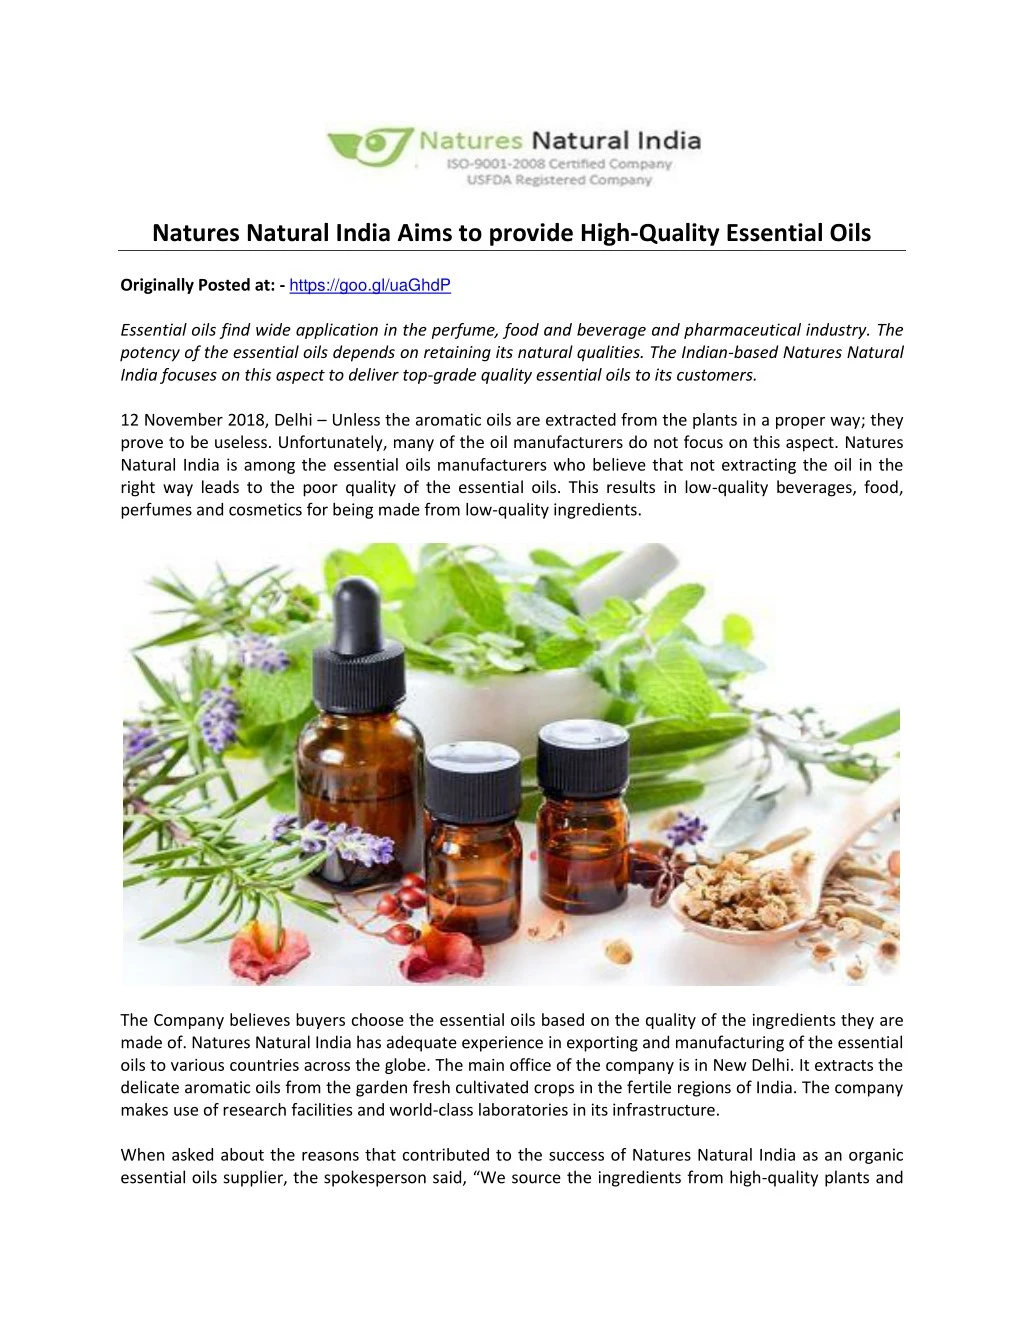 natures natural india aims to provide high